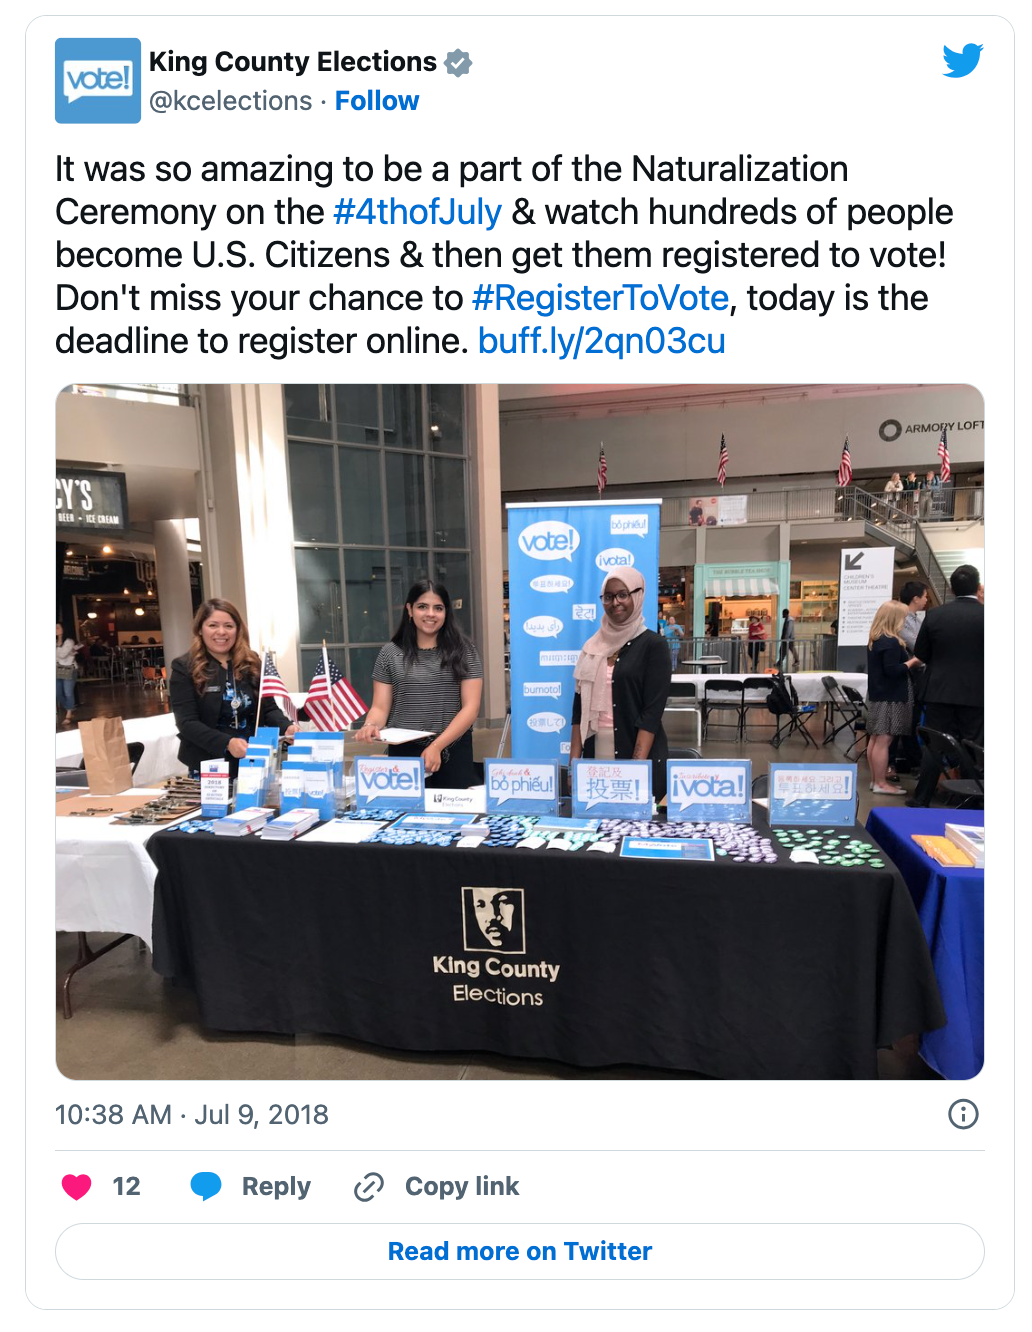 A tweet with a photo of people standing behind a voter registration booth. The tweet reads, "It was so amazing to be a part of the Natrualization Ceremony on the 4th of July & watch hudnreds of people become U.S. Citizens & then get them registered to vote!"